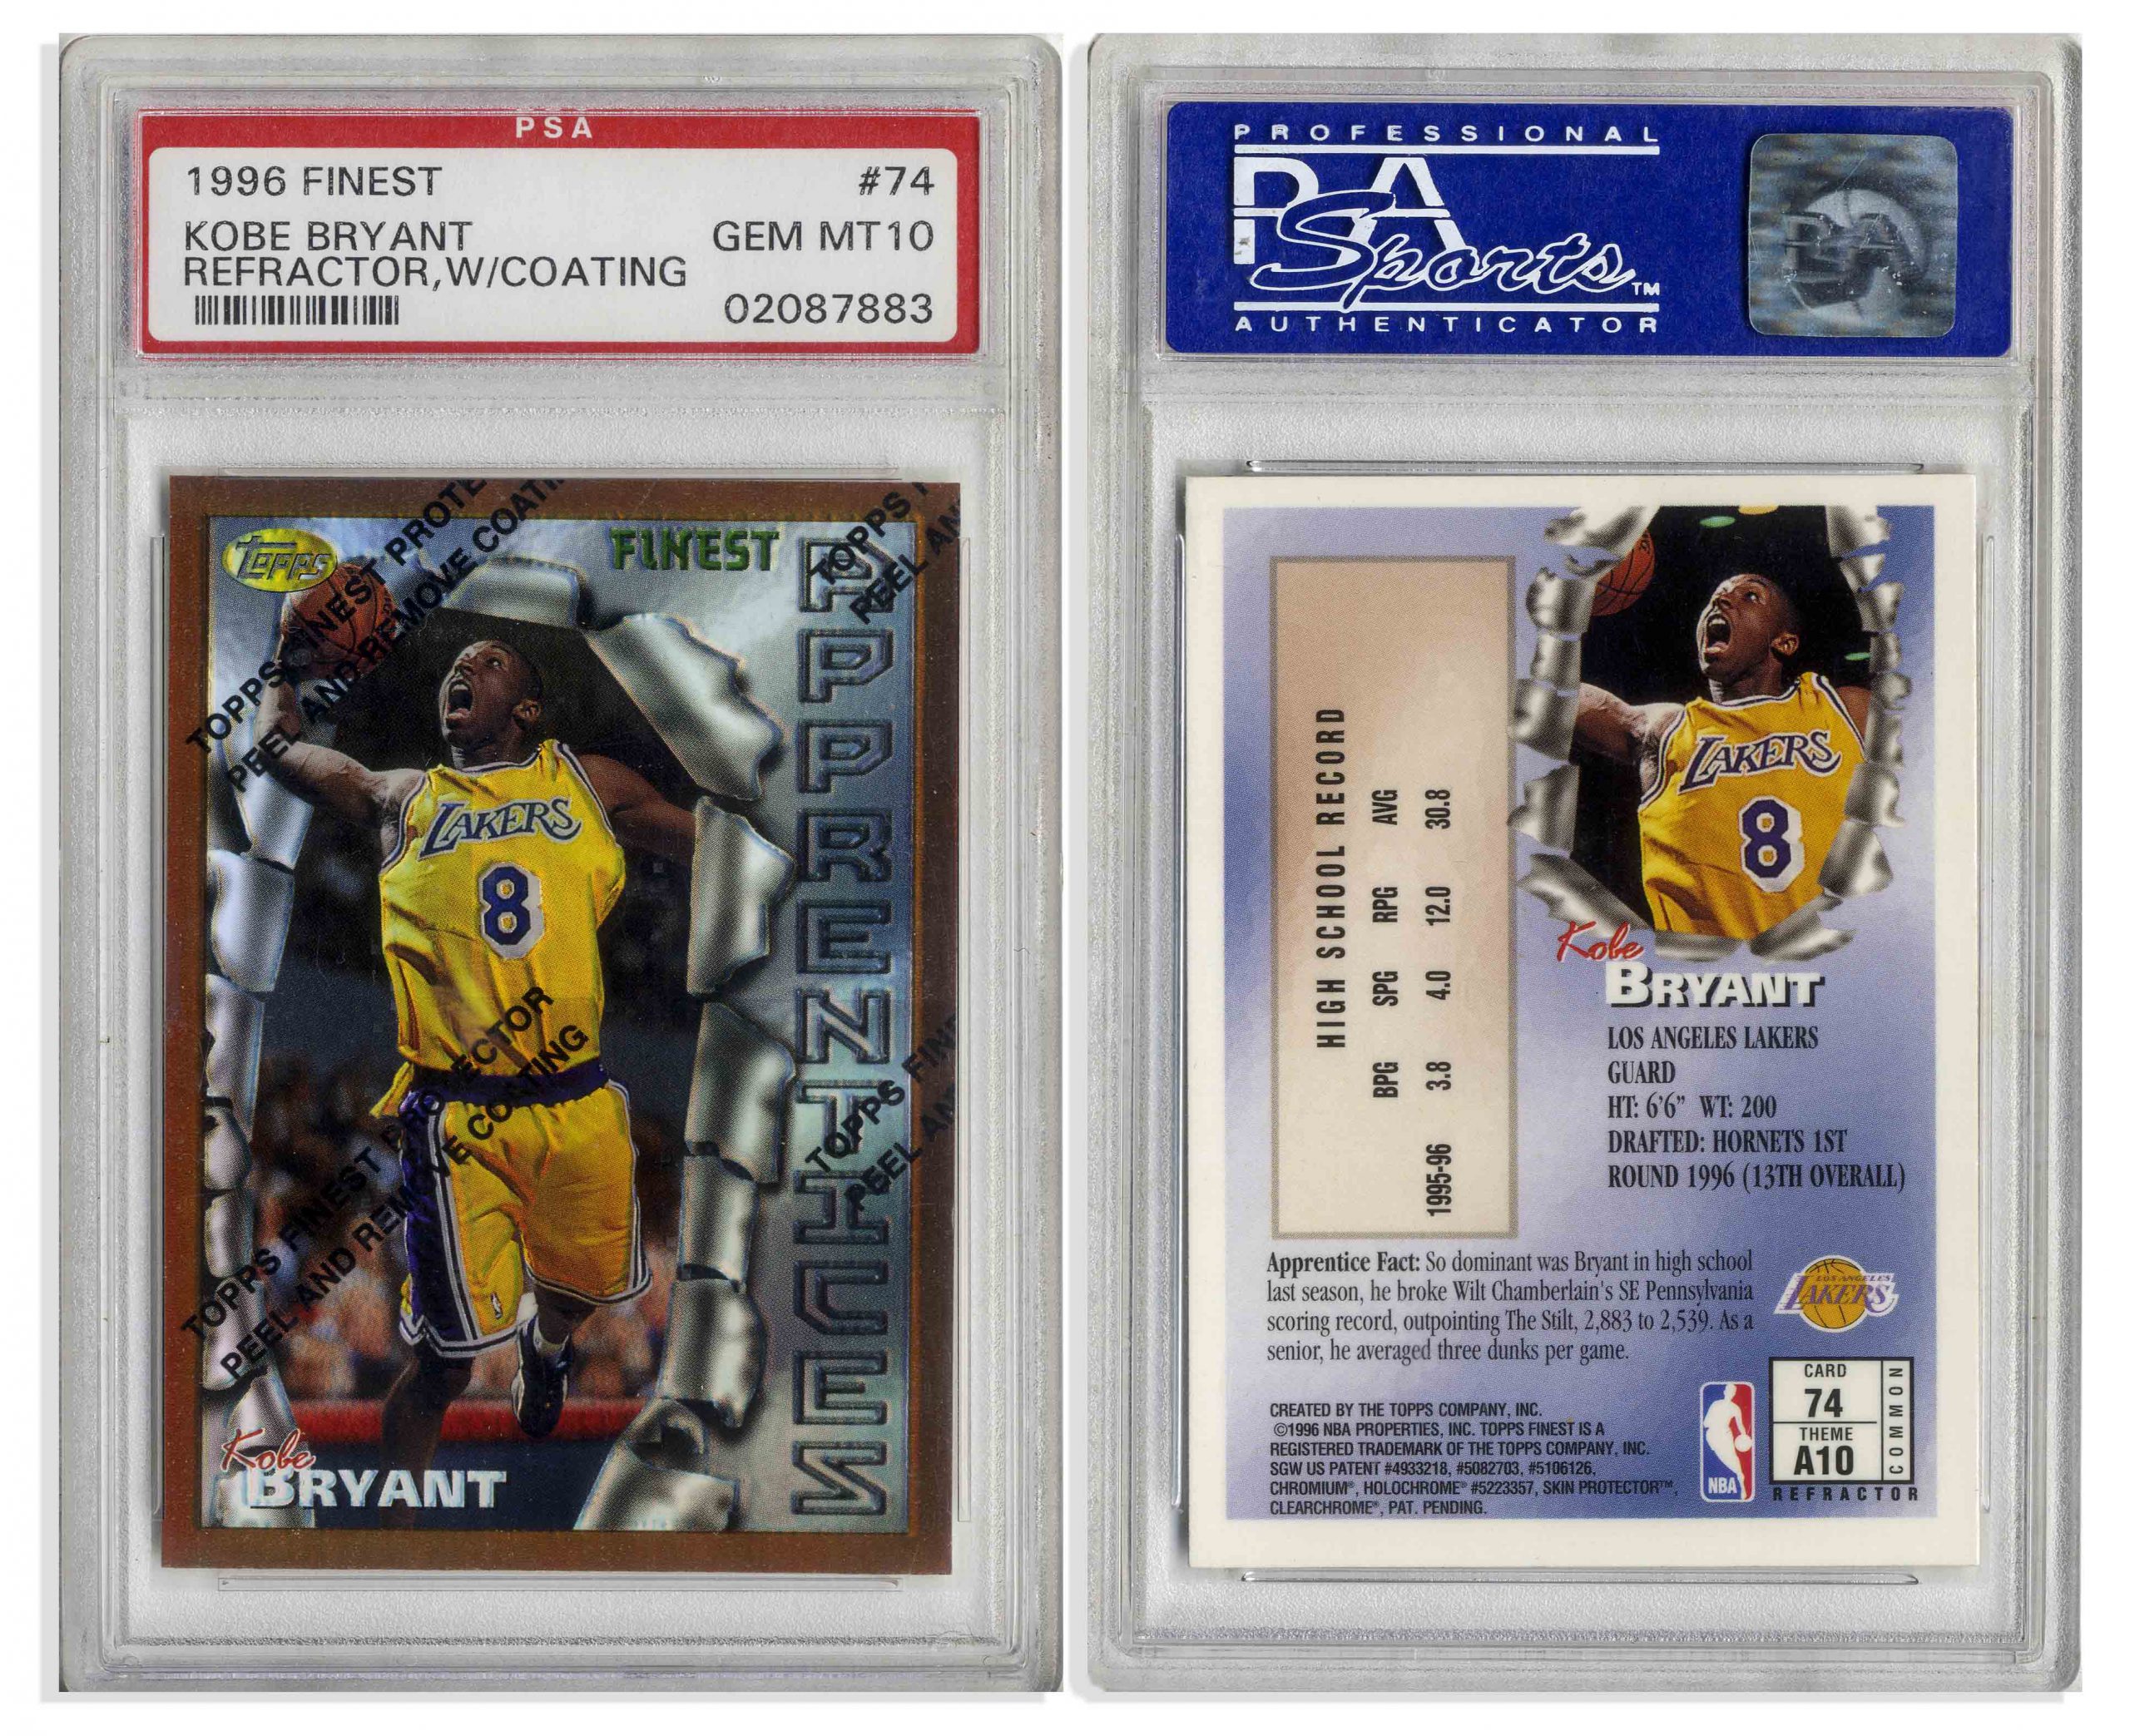 Sell 2003-04 Upper Deck Exquisite Patches Kobe Bryant Beckett BGS 9.5